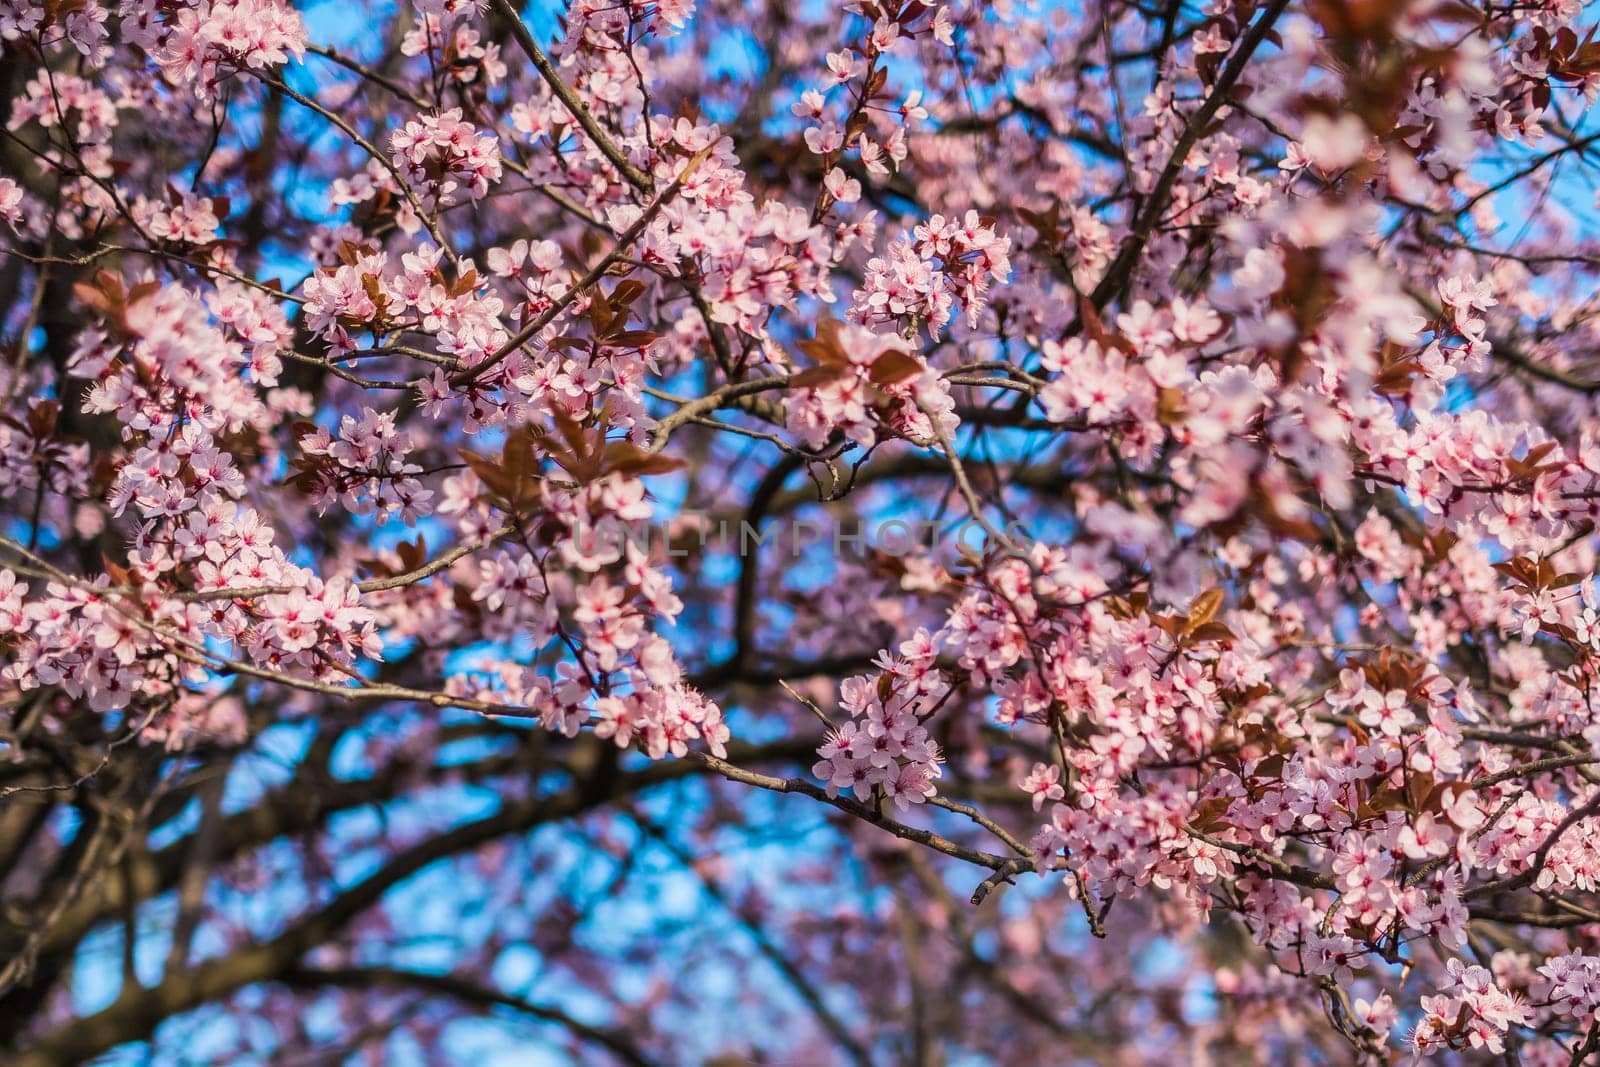 Selective focus of beautiful branches of pink Cherry blossom on the tree under blue sky, Beautiful Sakura flowers during spring season in the park, Nature floral background with copy space. Blooming and blossom by Satura86